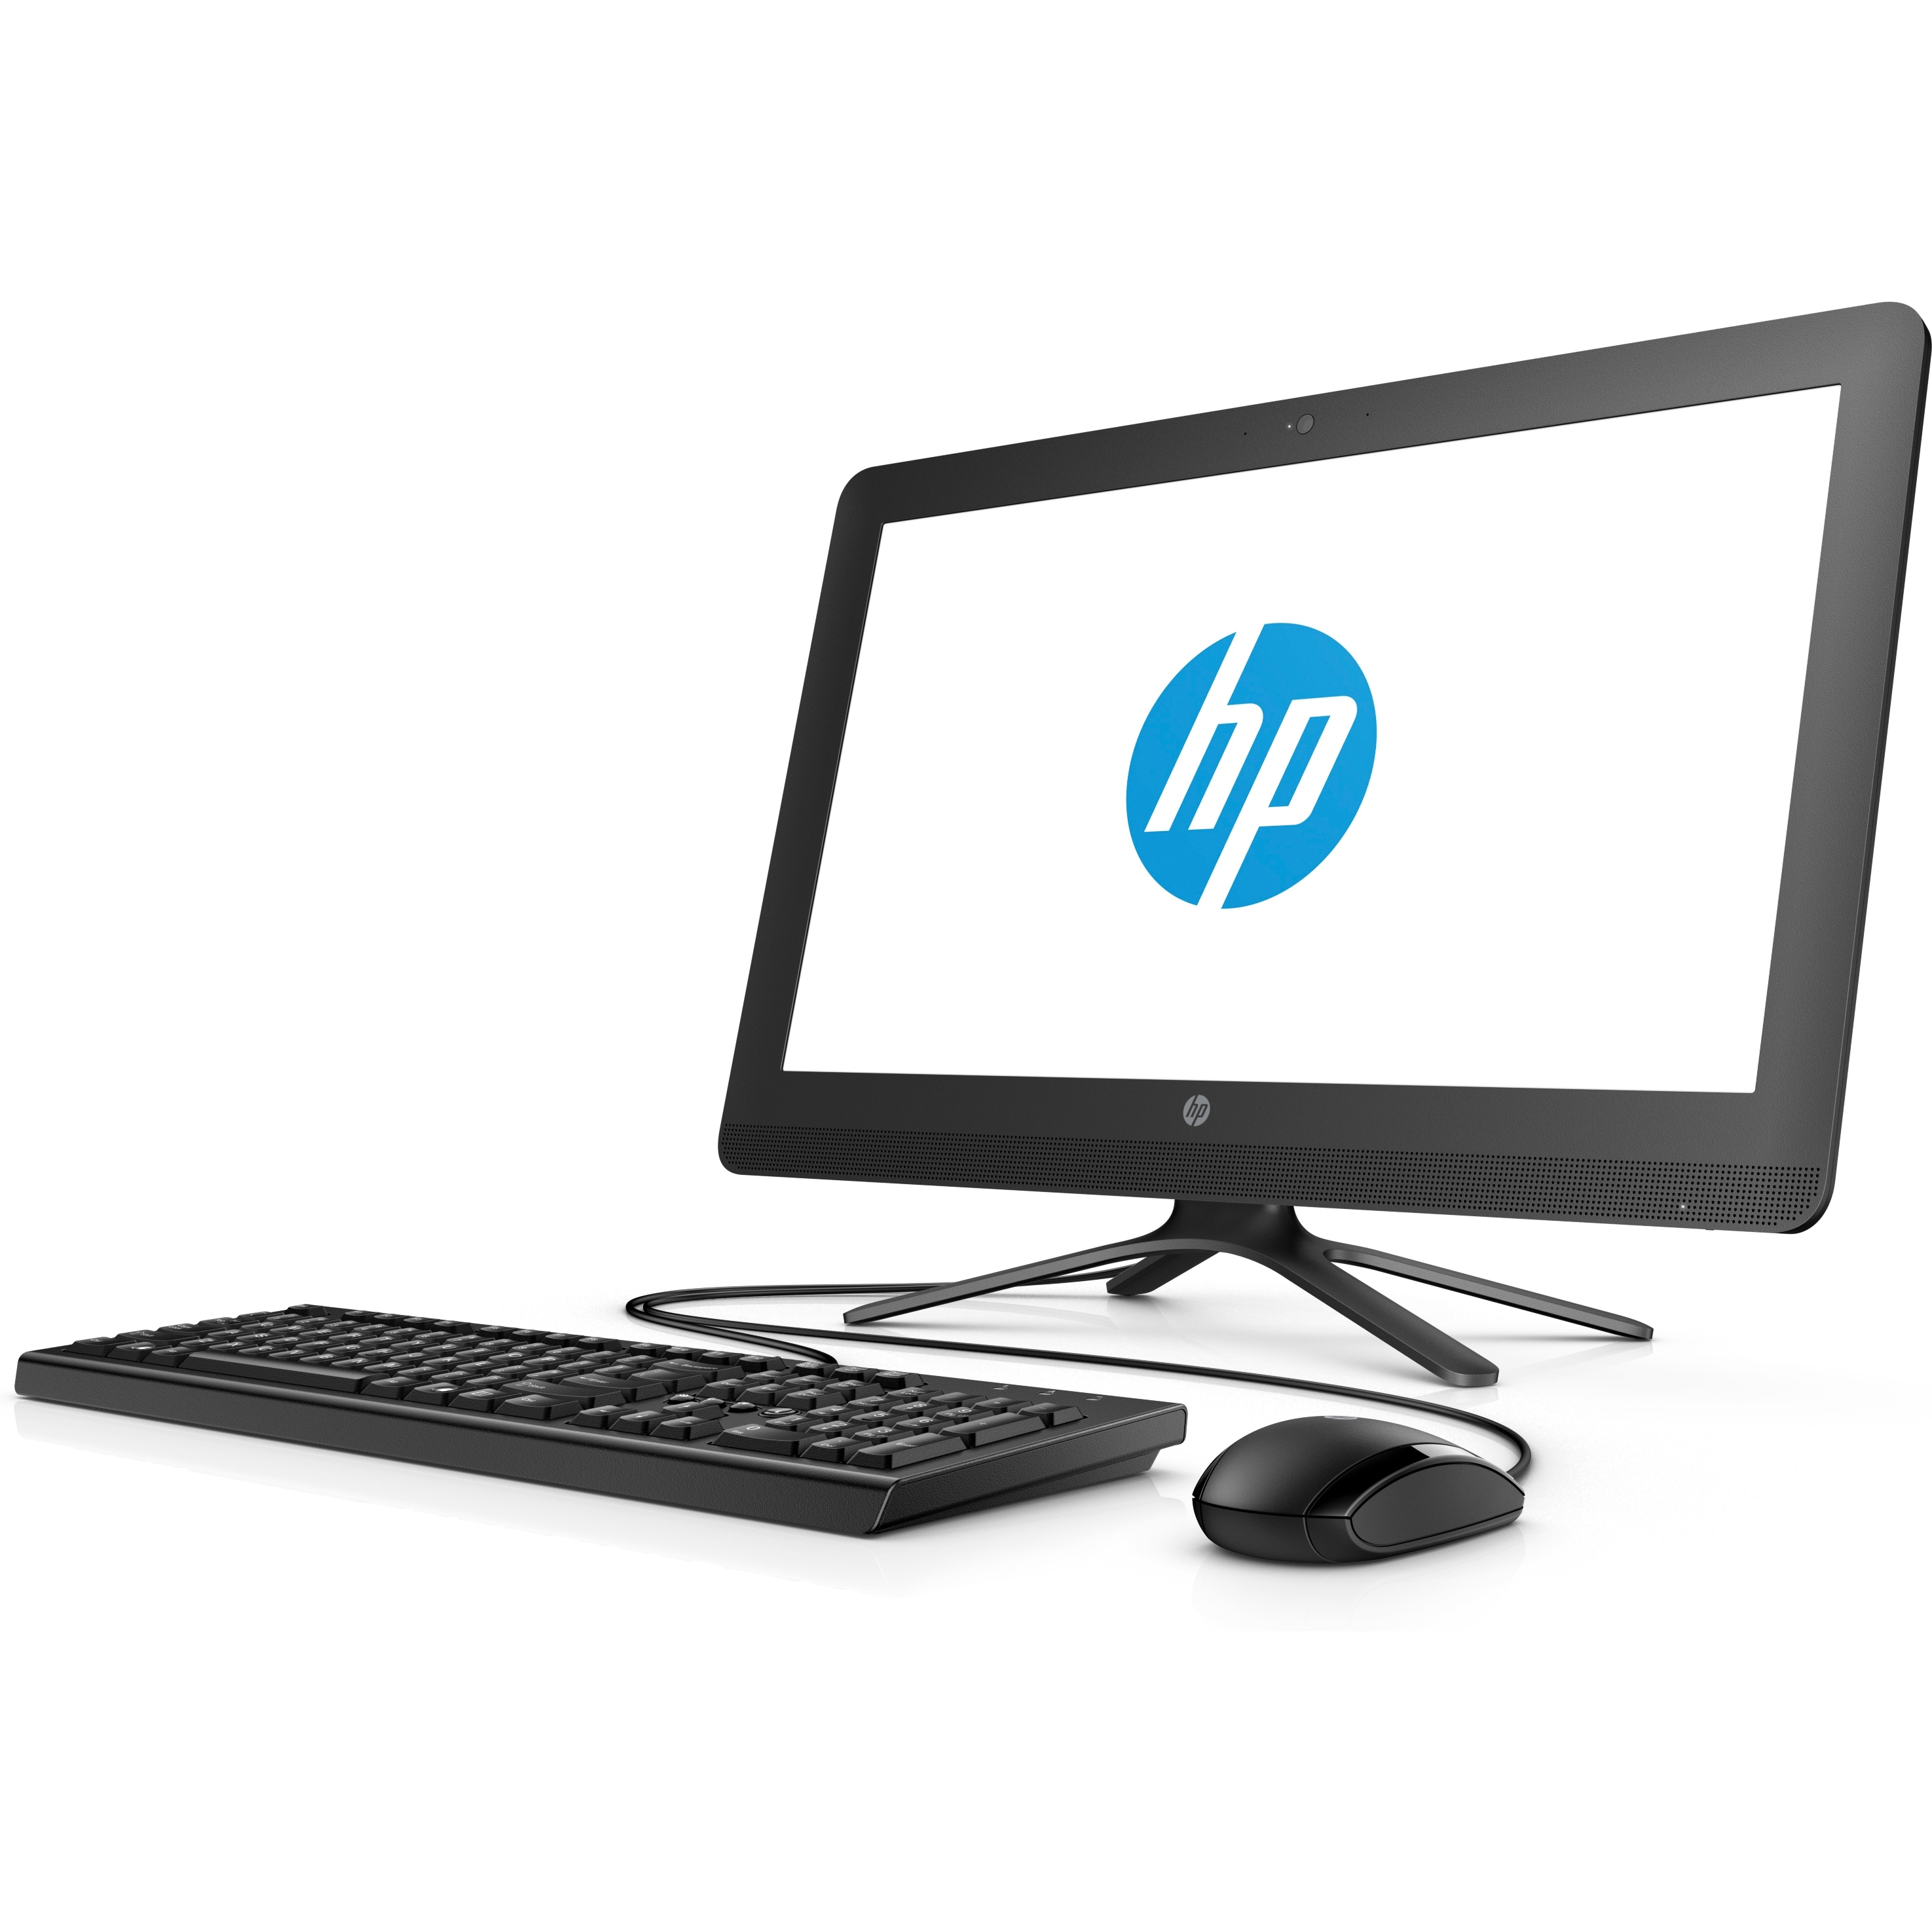 HP 22-C0036NT 4MM87EA i3-8130U 4GB 256SSD O/B VGA 21.5" FHD NONTOUCH FREDOOS ALL IN ONE PC